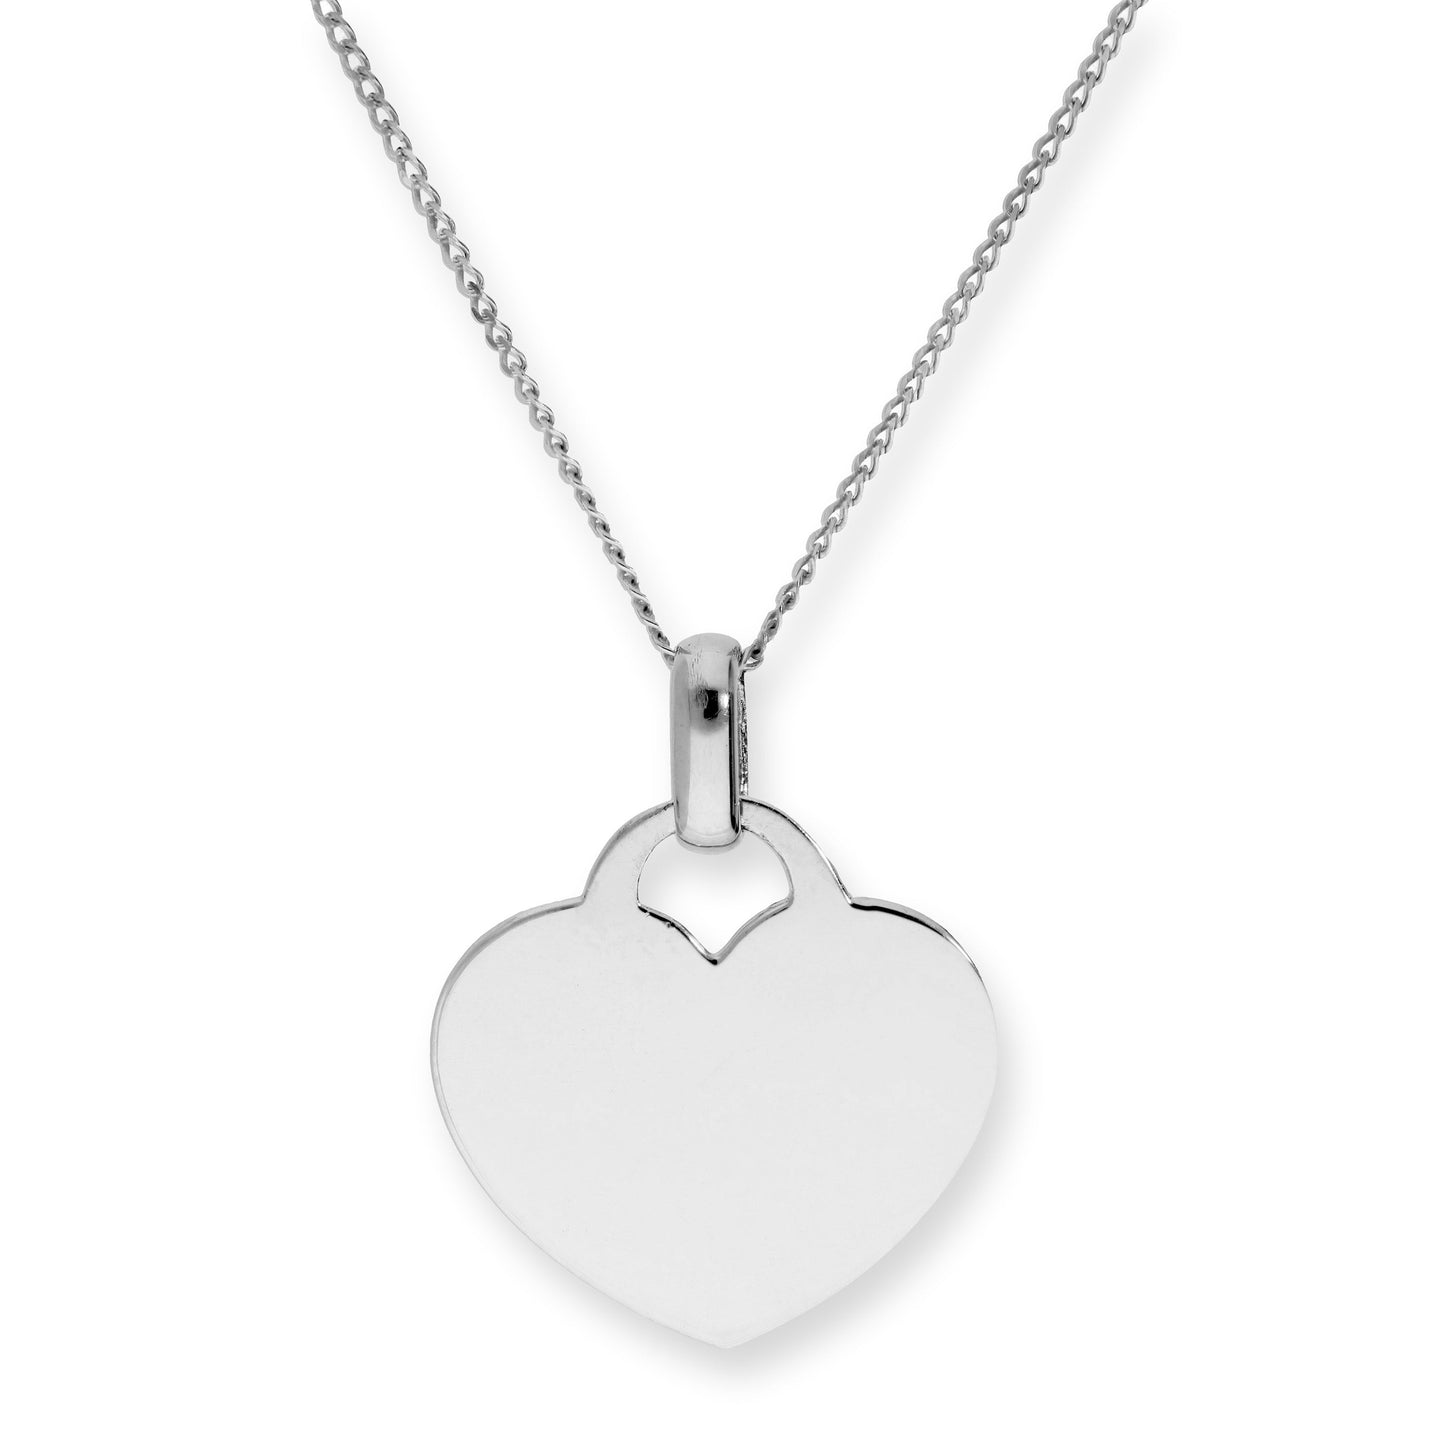 9ct White Gold Engravable Heart Pendant Necklace 16 - 18 Inches